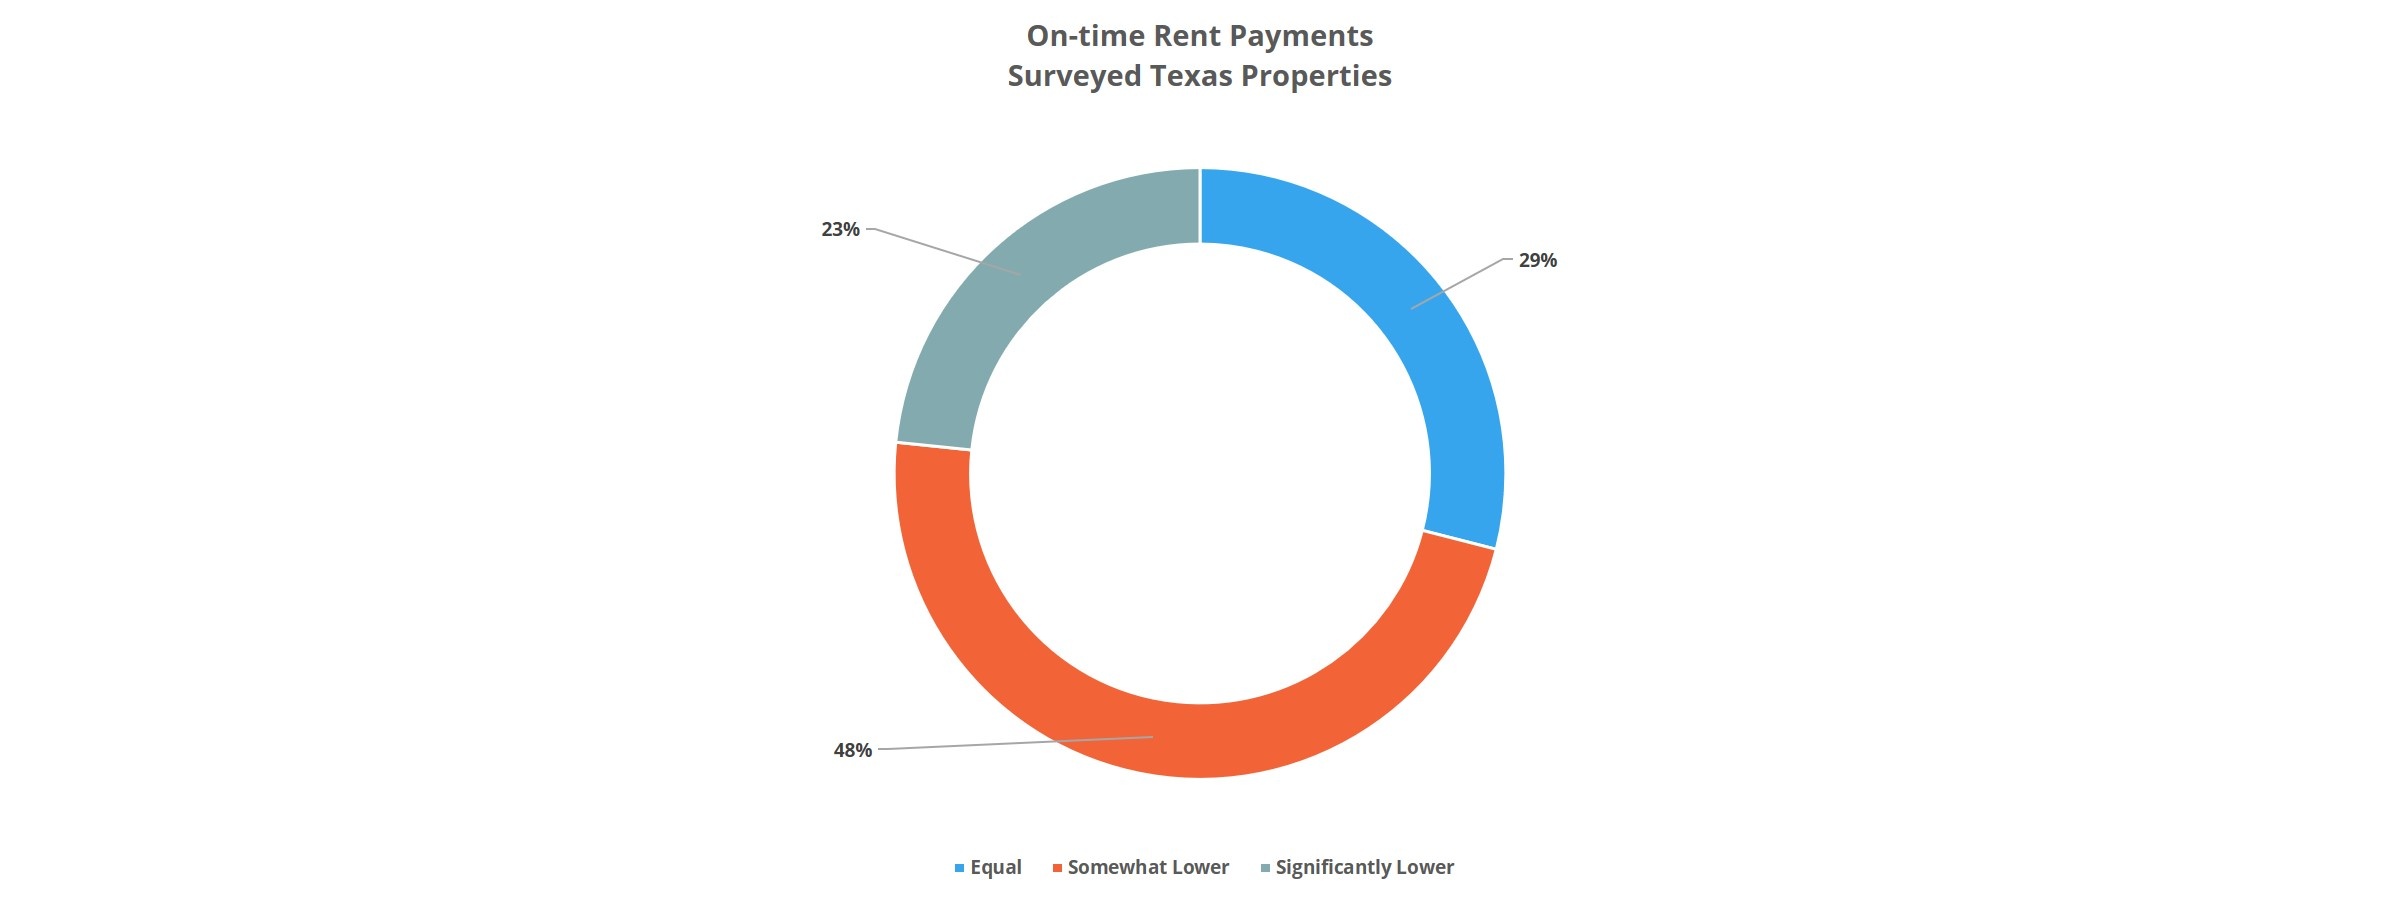 On-time Rent Payments 